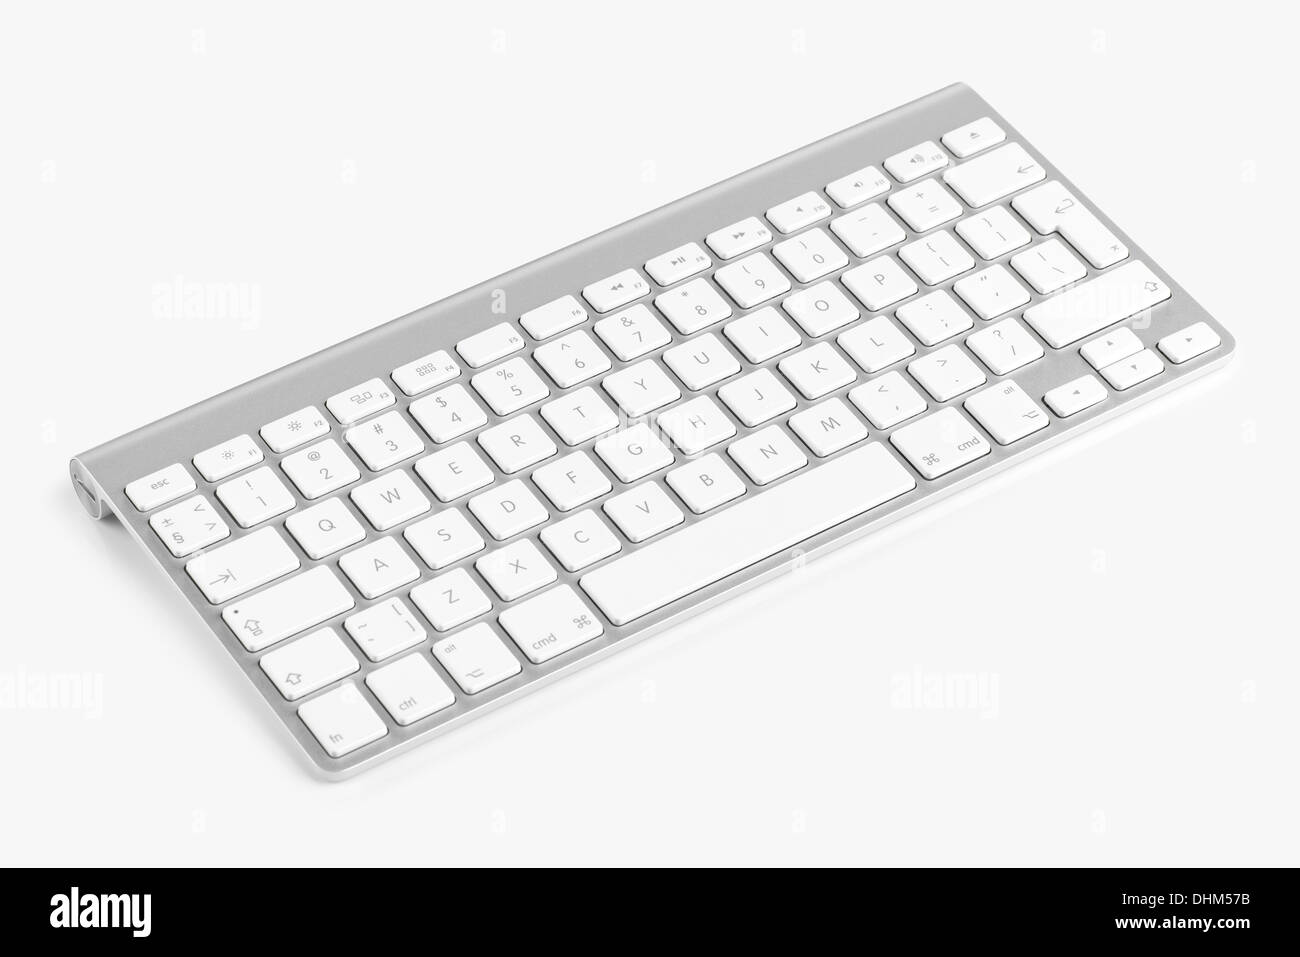 Wireless computer keyboard with the English alphabet isolated on white background Stock Photo